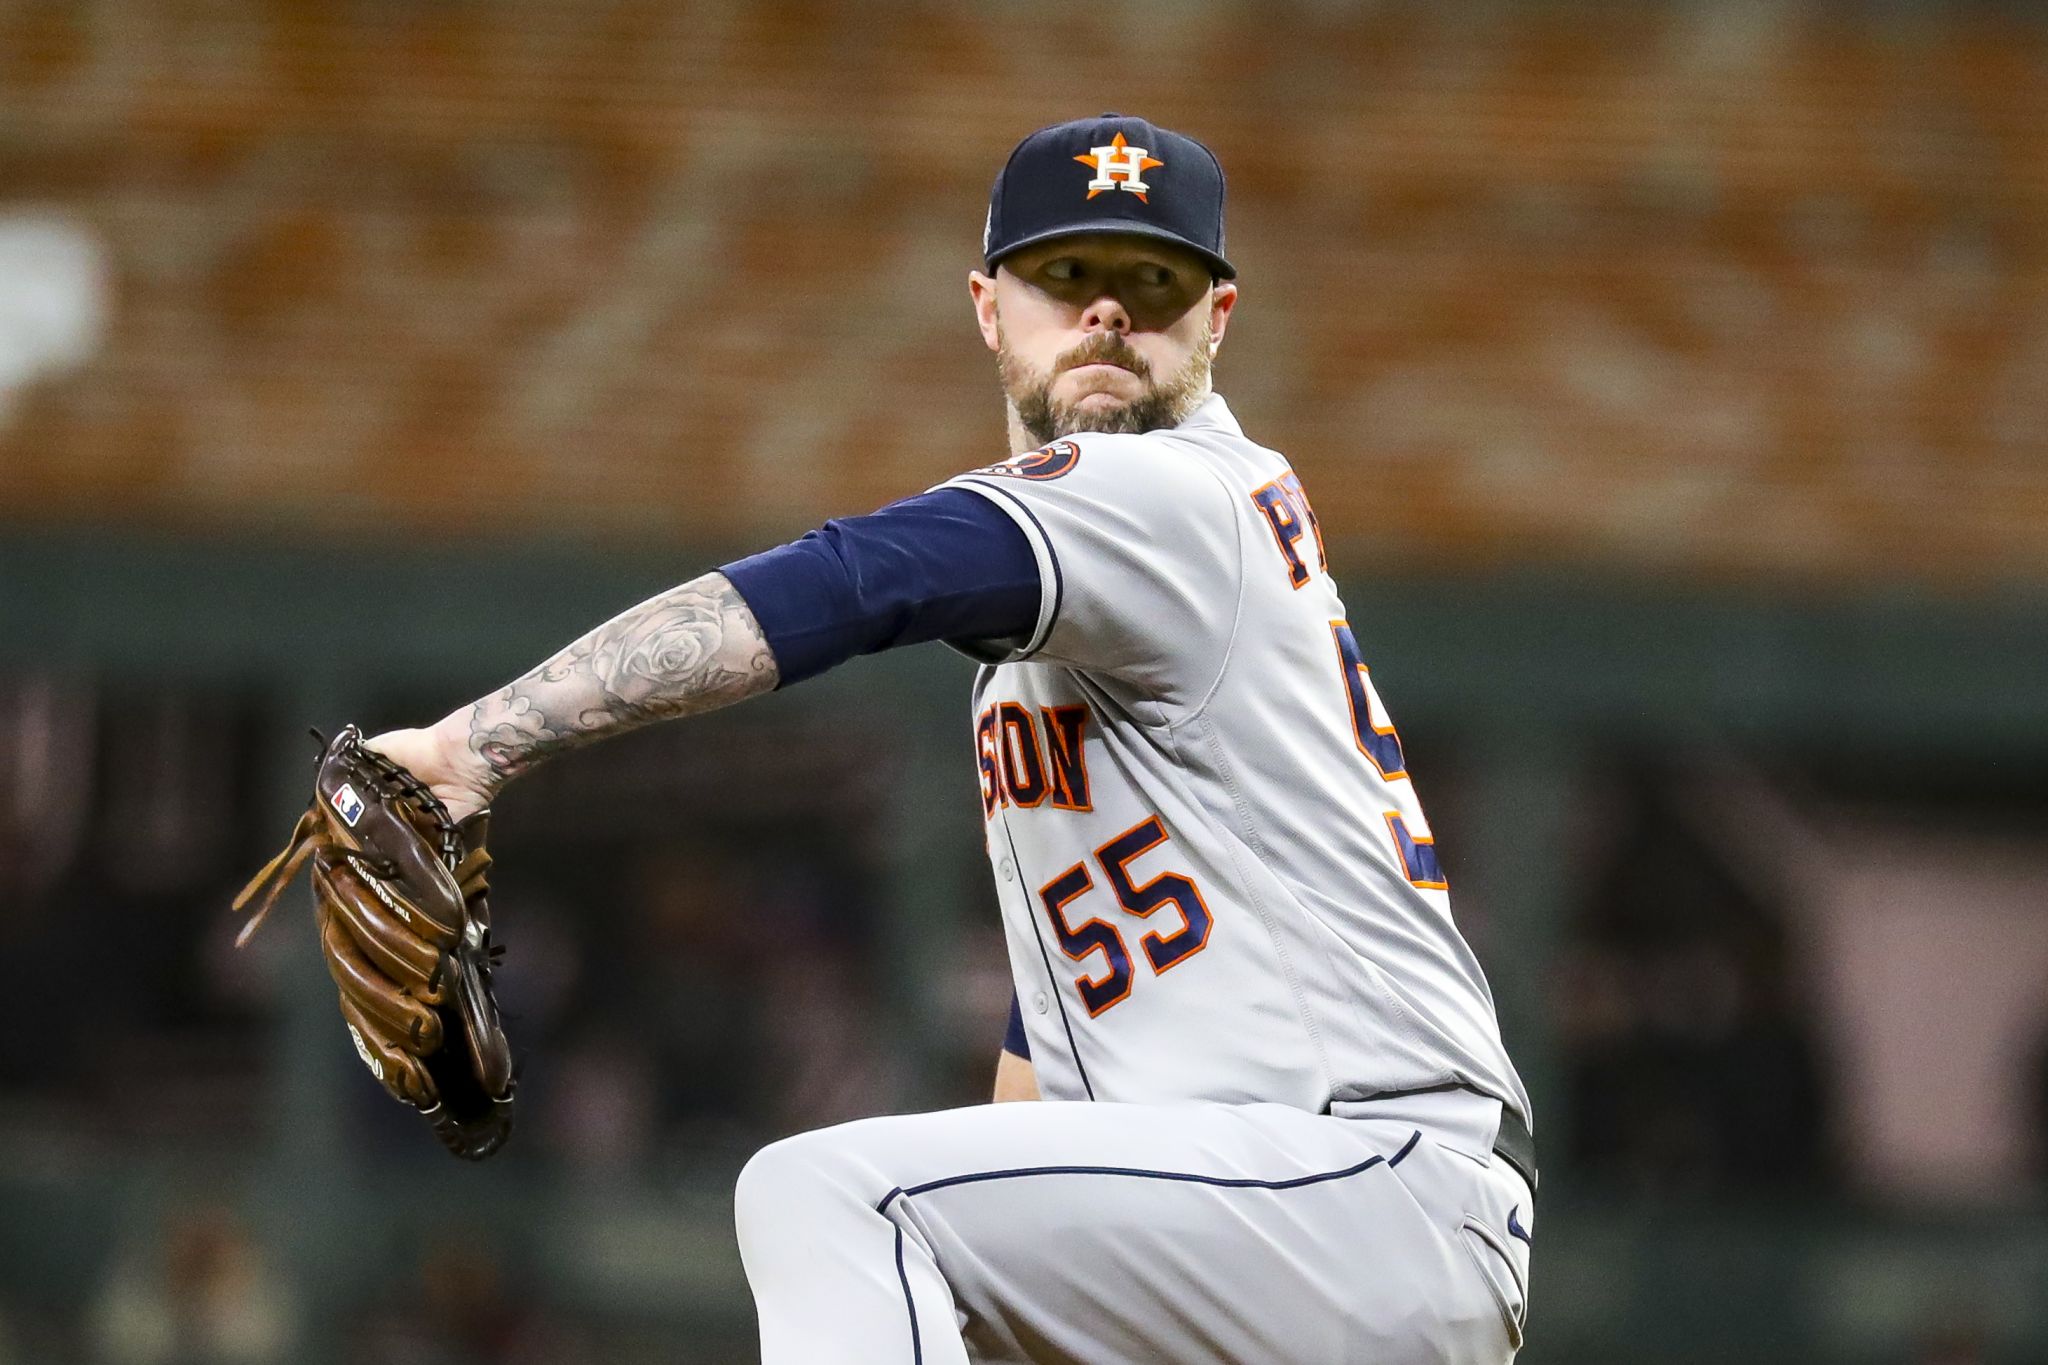 Ryan Pressly excited to be staying with Astros